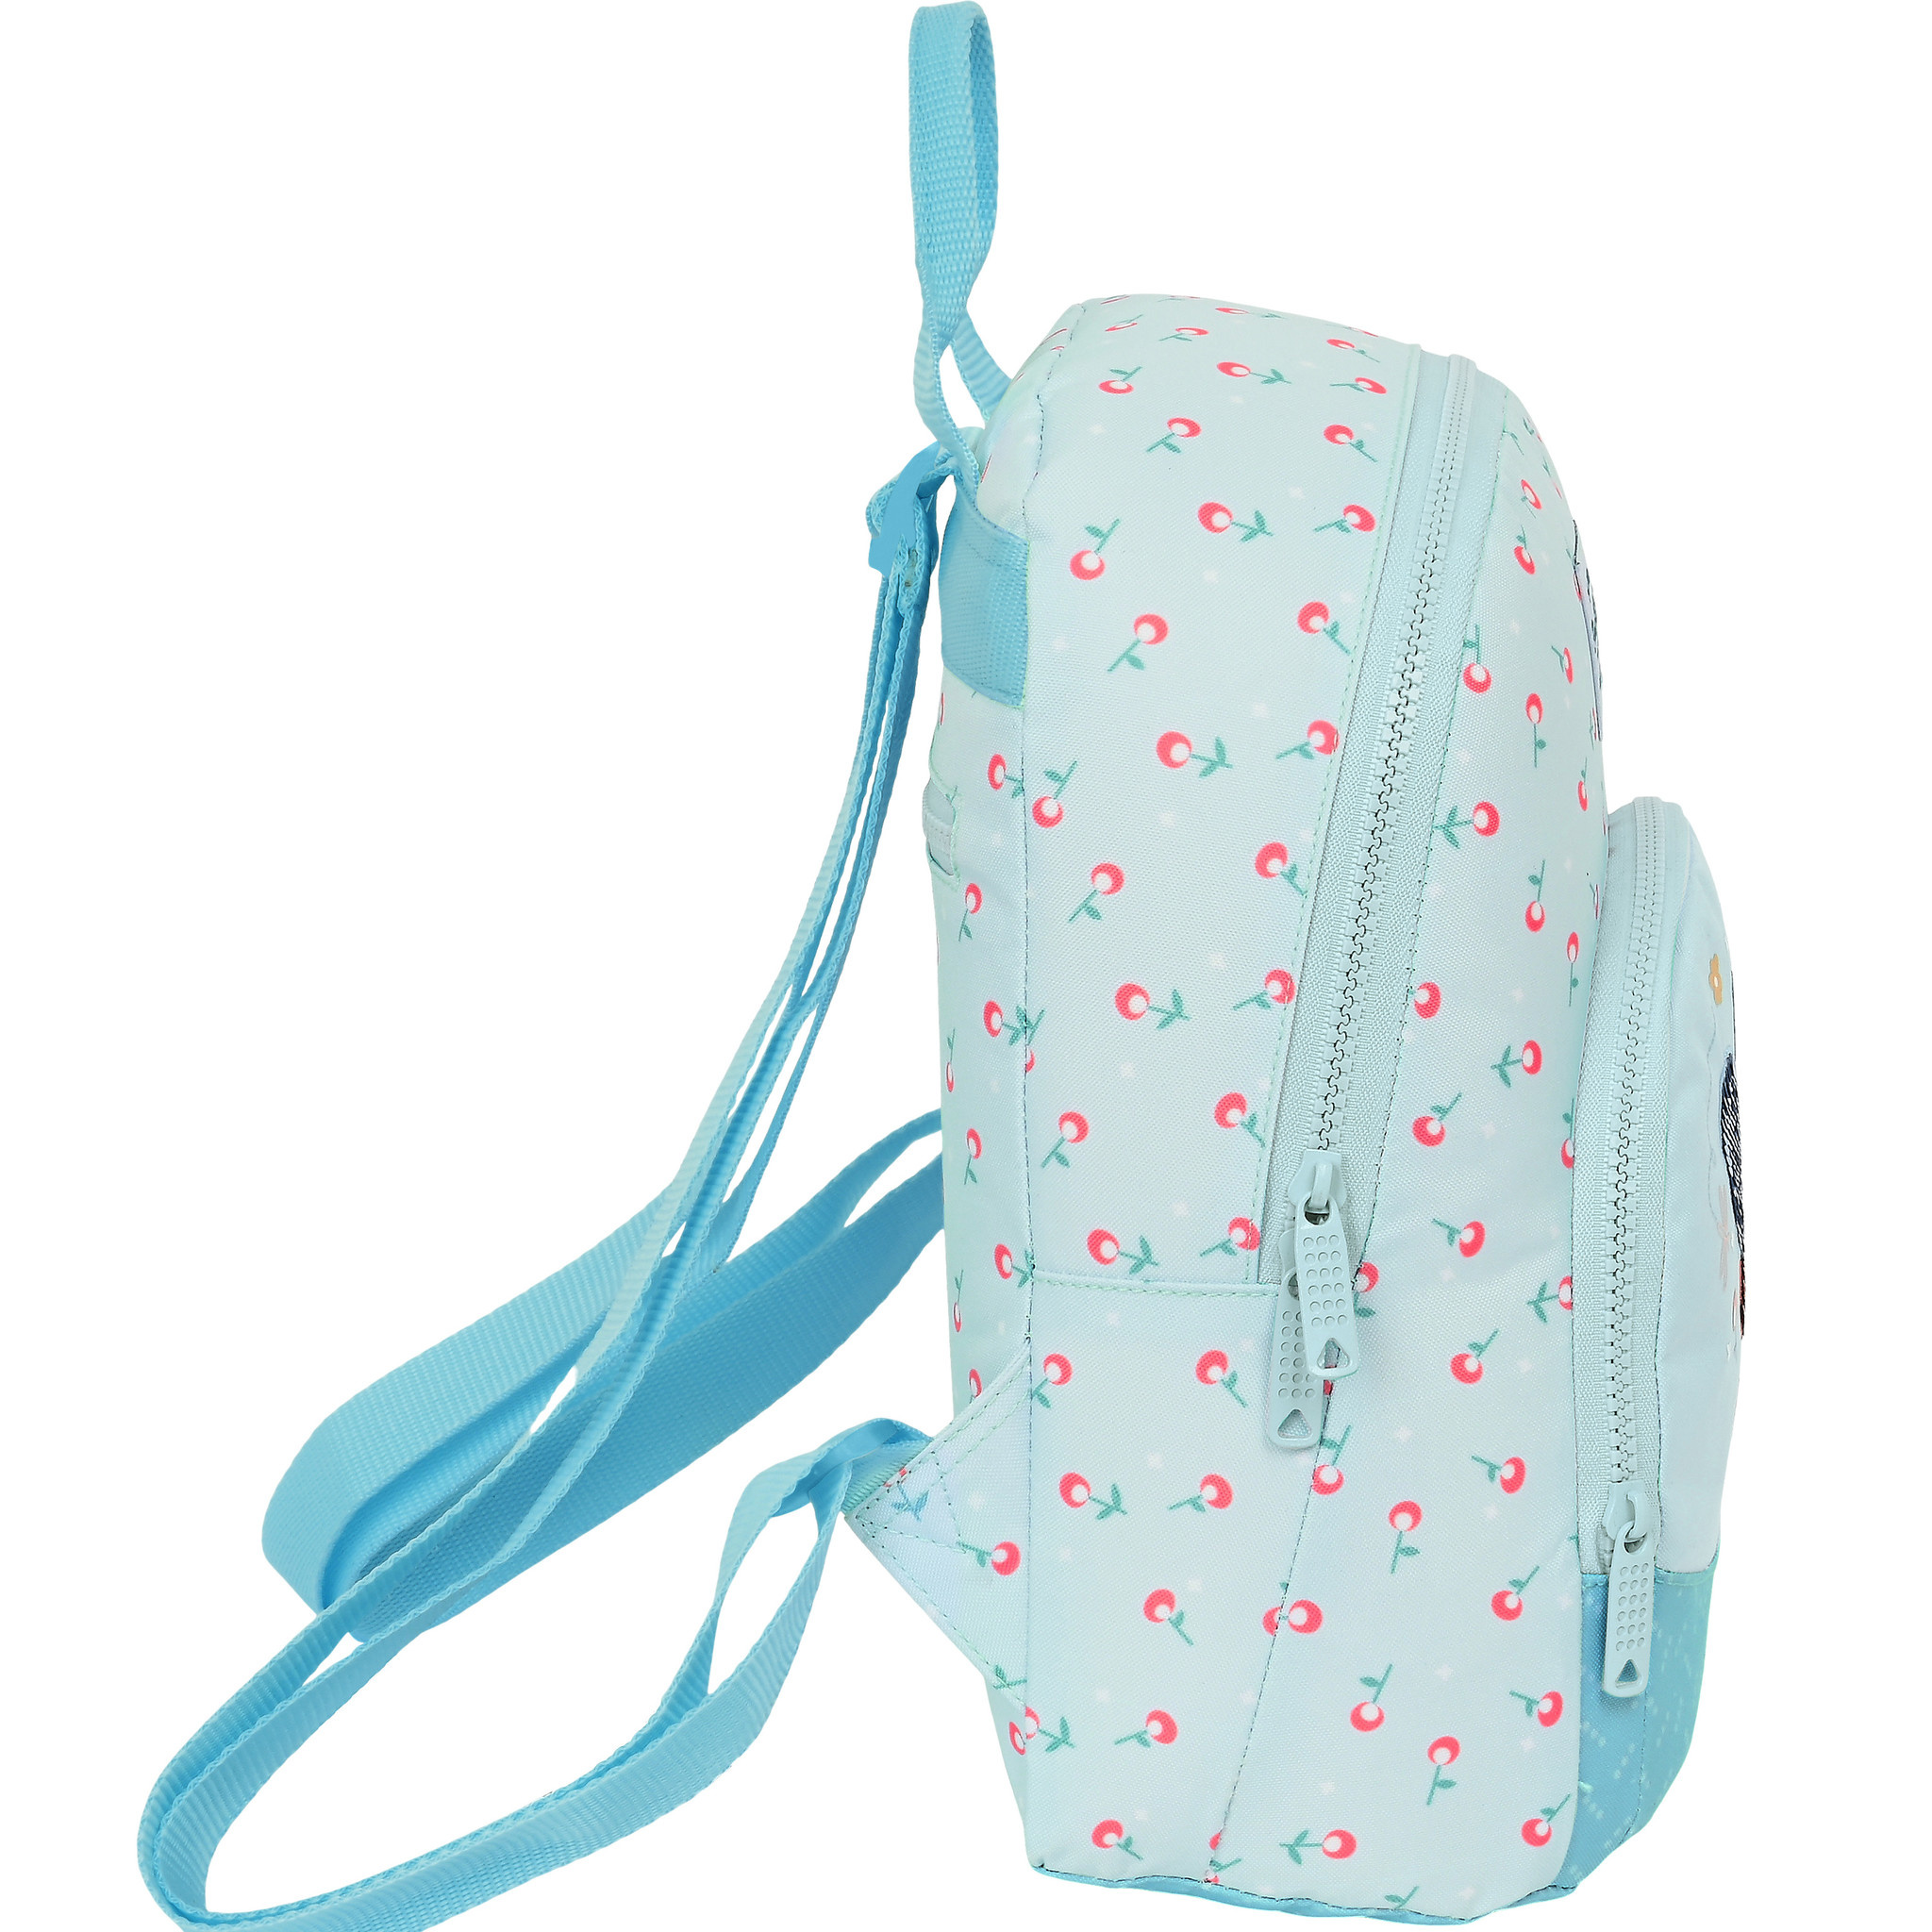 BlackFit8 Toddler backpack Butterfly - 30 x 25 x 13 cm - Polyester